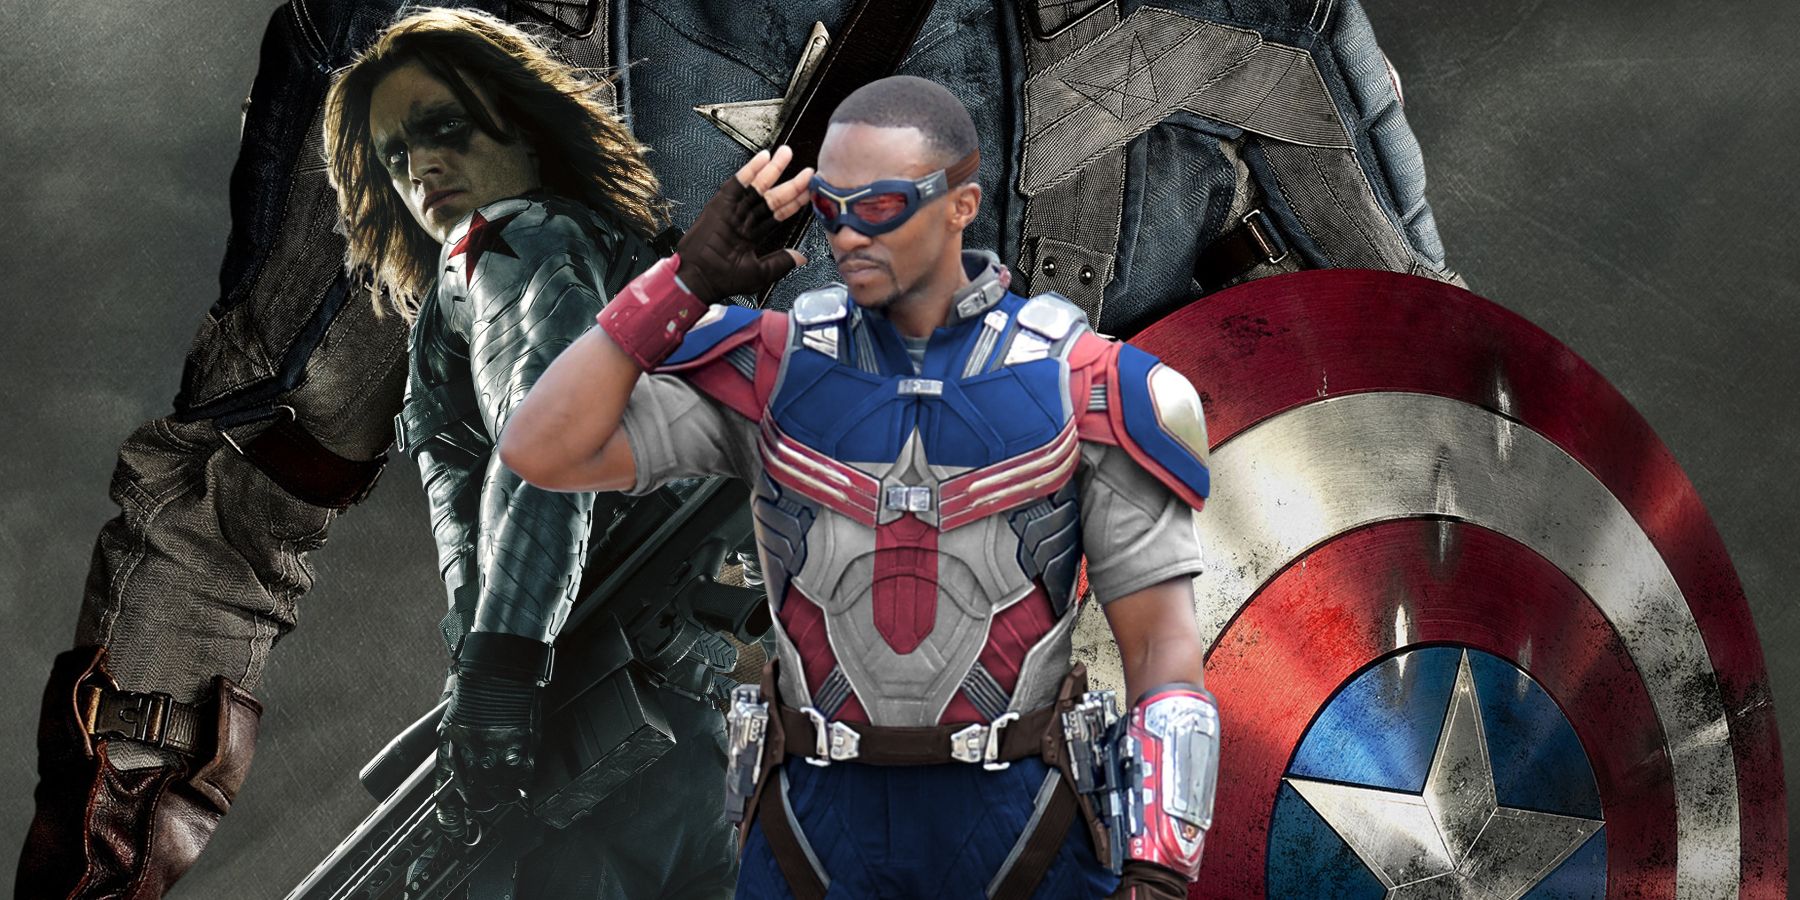 falcon and winter soldier fake captain america actor